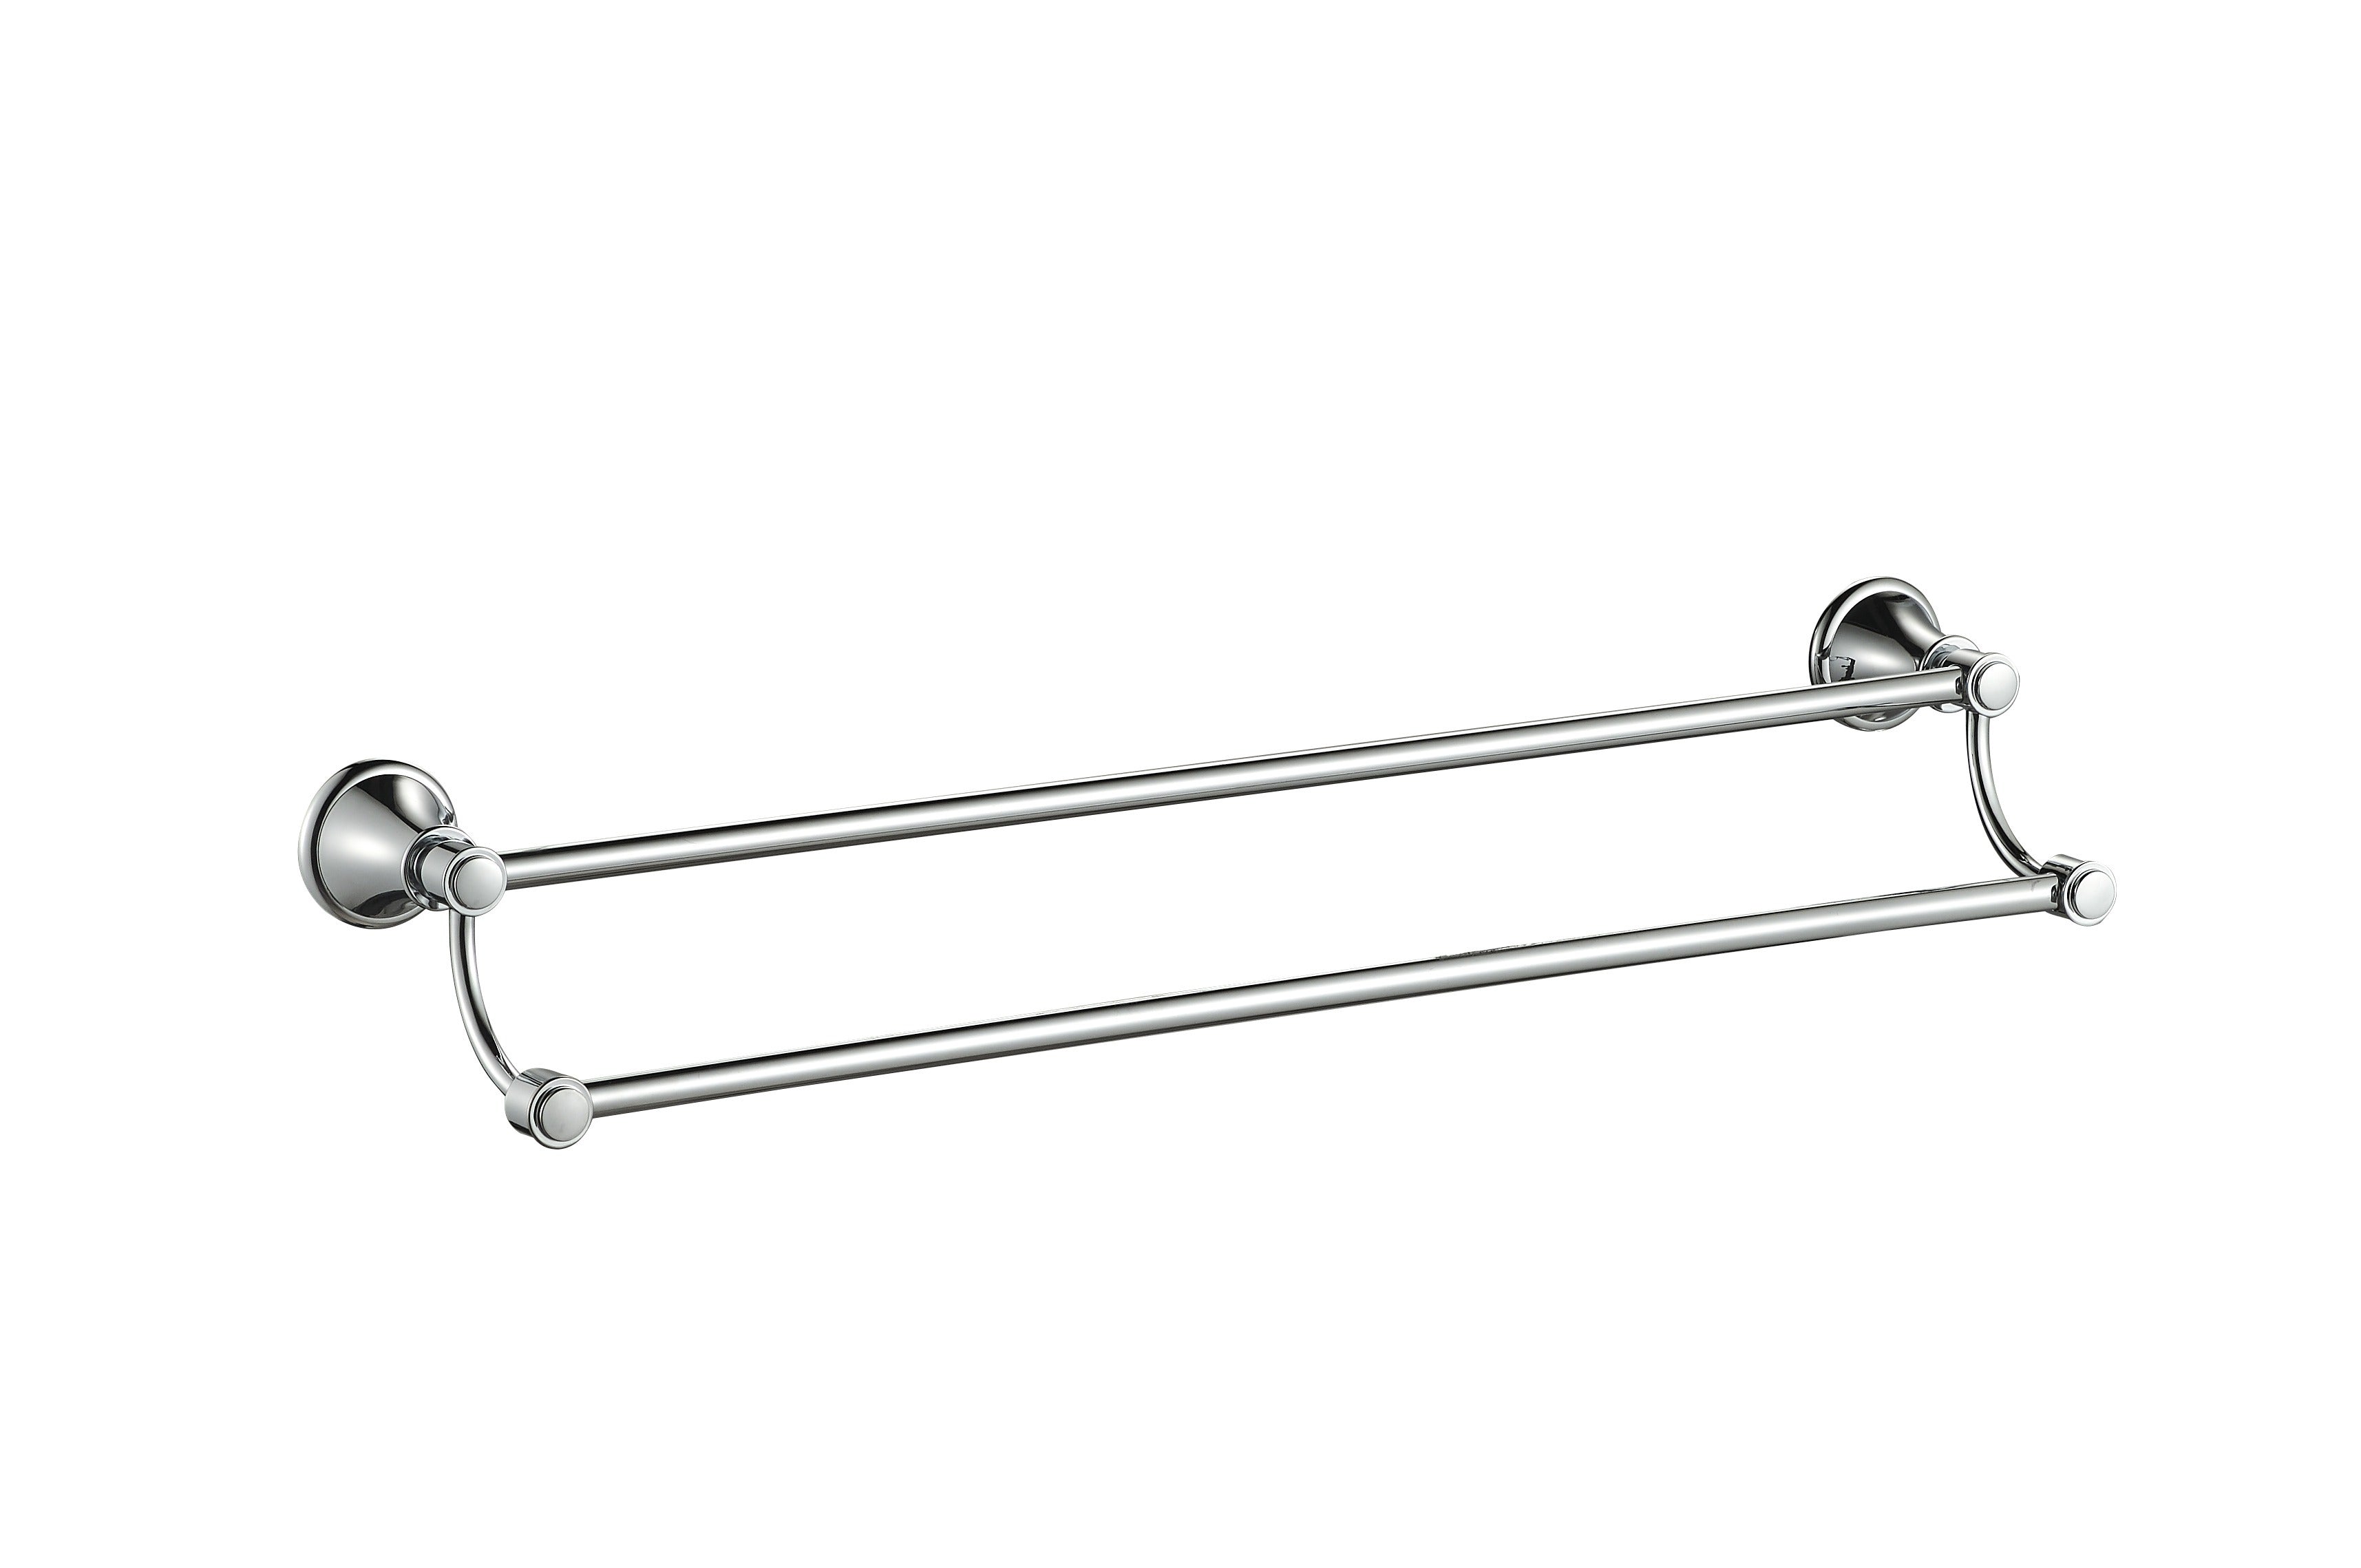 IKON CLASICO NON-HEATED DOUBLE TOWEL RAIL BRUSHED NICKEL 800MM